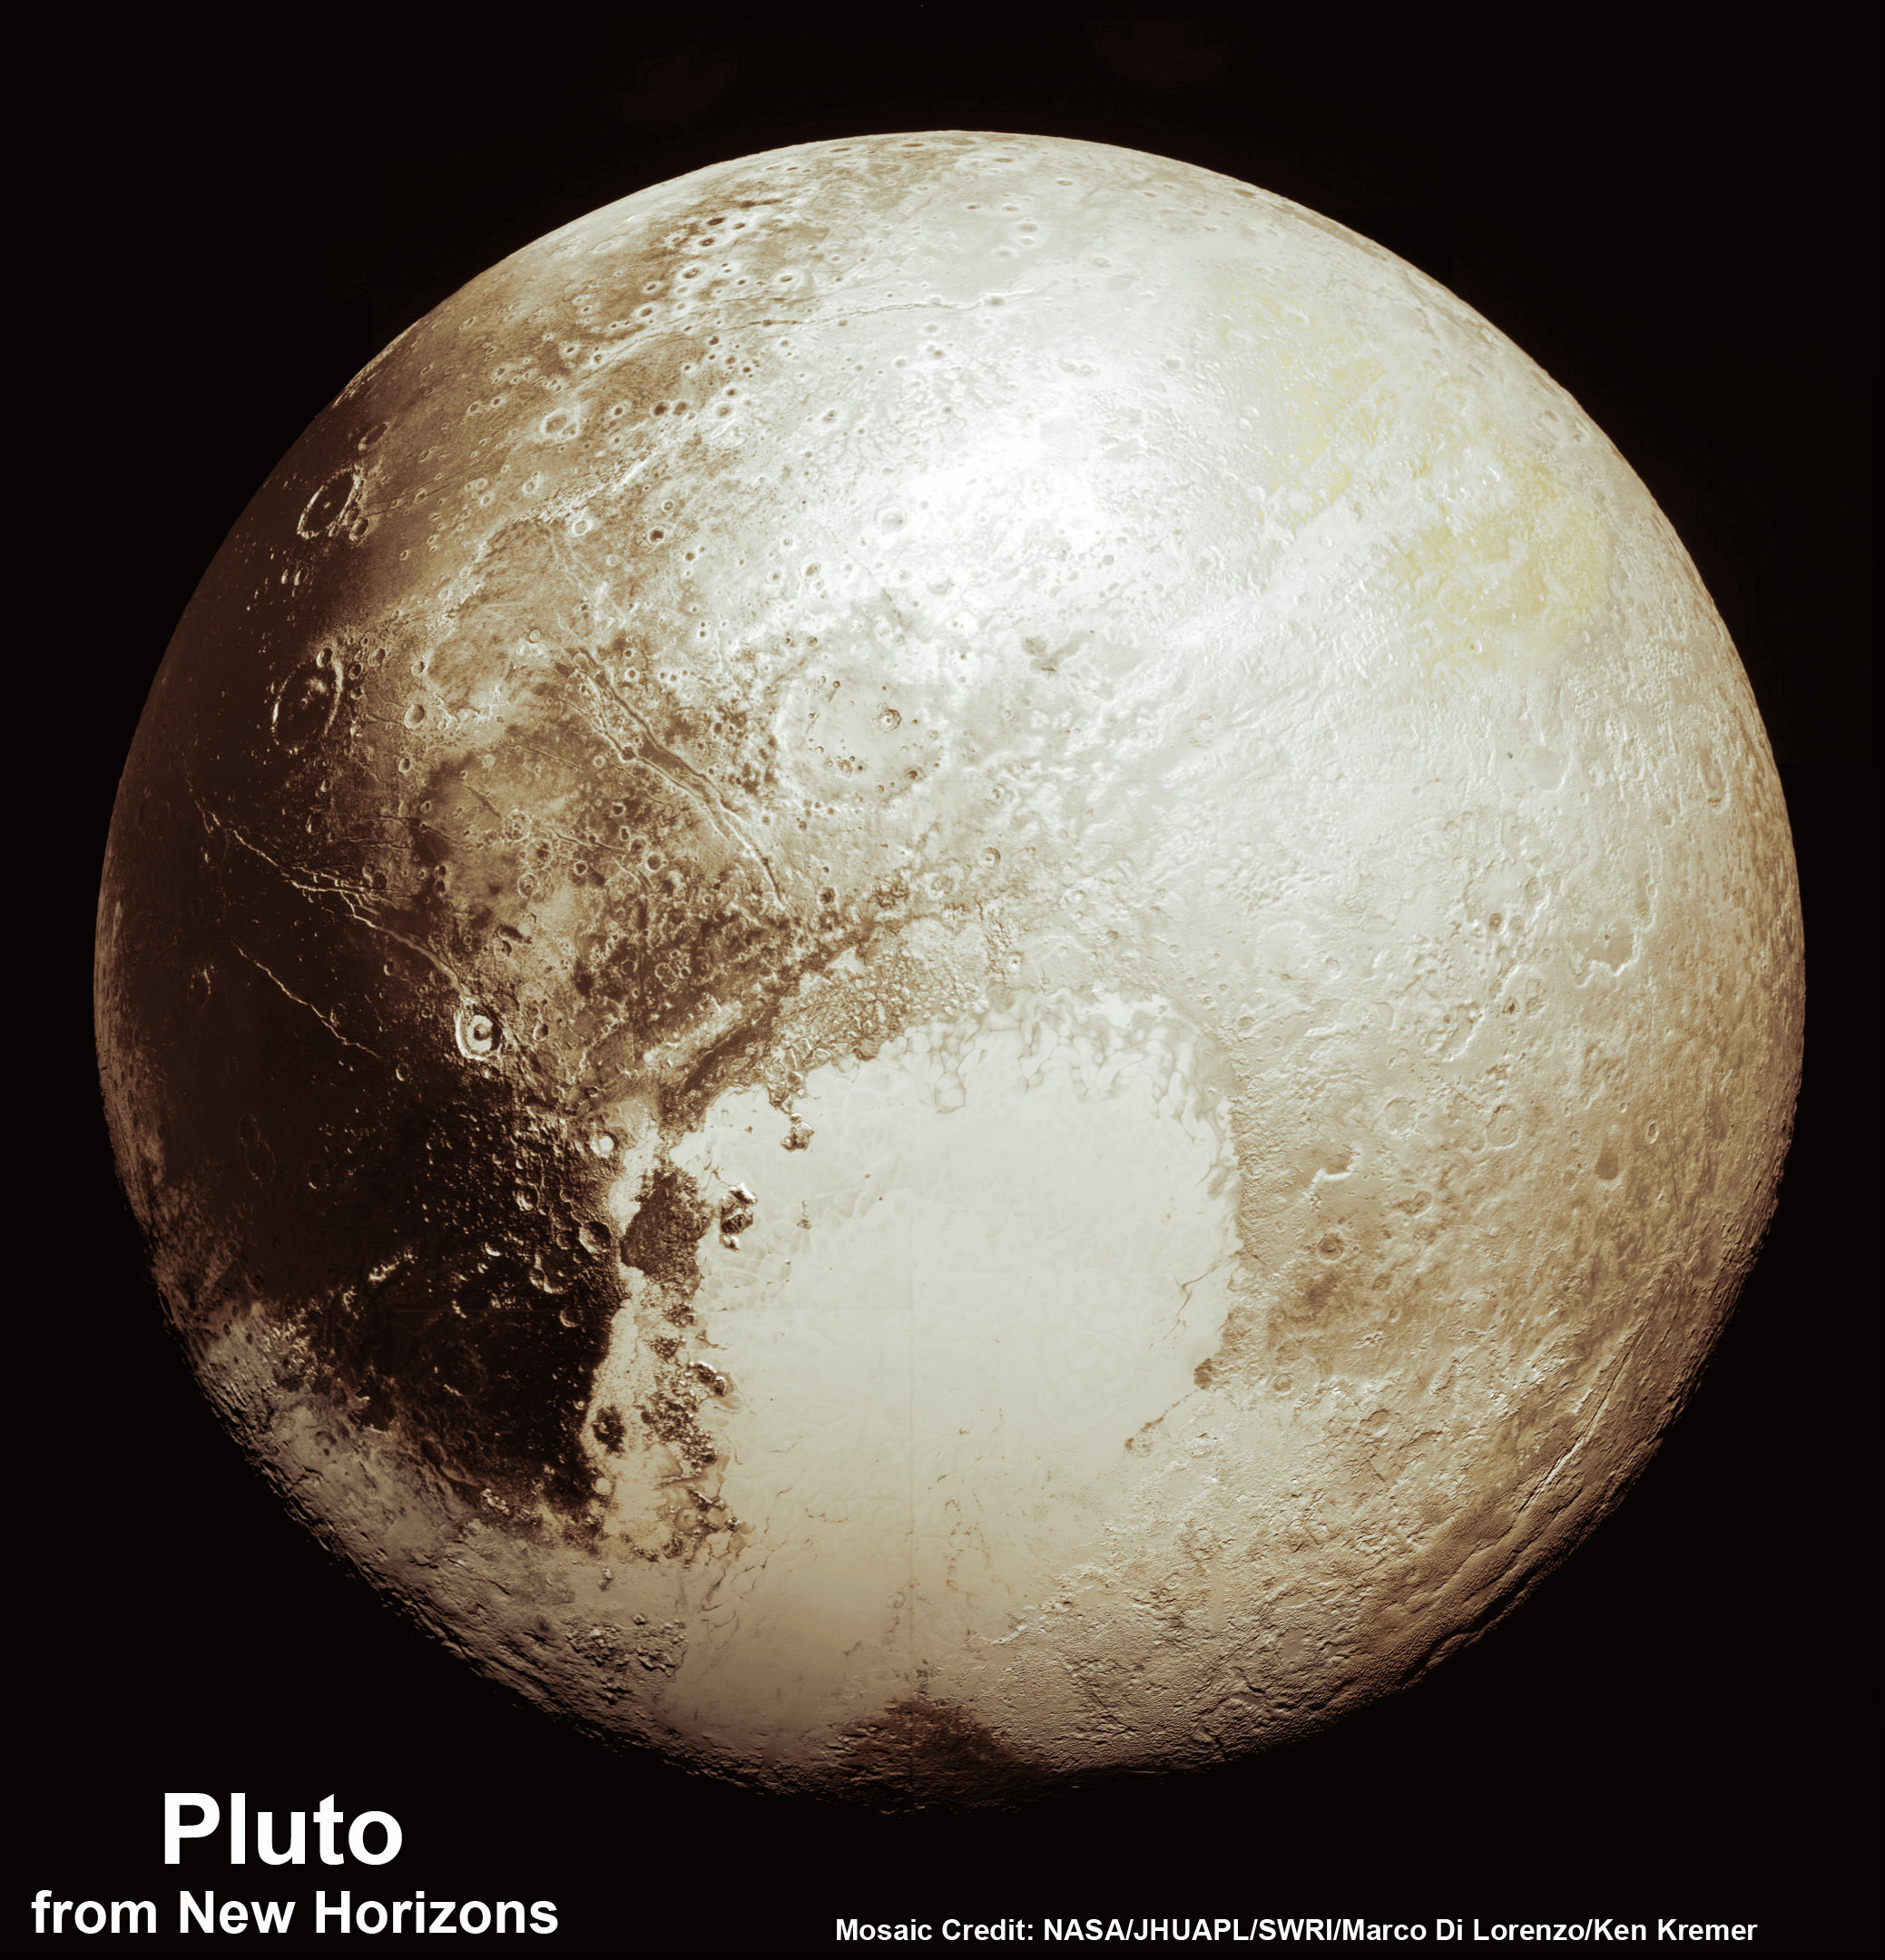 This new global mosaic view of Pluto was created from the latest high-resolution images to be downlinked from NASA’s New Horizons spacecraft and released on Sept. 11, 2015.   The images were taken as New Horizons flew past Pluto on July 14, 2015, from a distance of 50,000 miles (80,000 kilometers).  This new mosaic was stitched from over two dozen raw images captured by the LORRI imager and colorized.  Credits: NASA/Johns Hopkins University Applied Physics Laboratory/Southwest Research Institute/Marco Di Lorenzo/Ken Kremer/kenkremer.com 